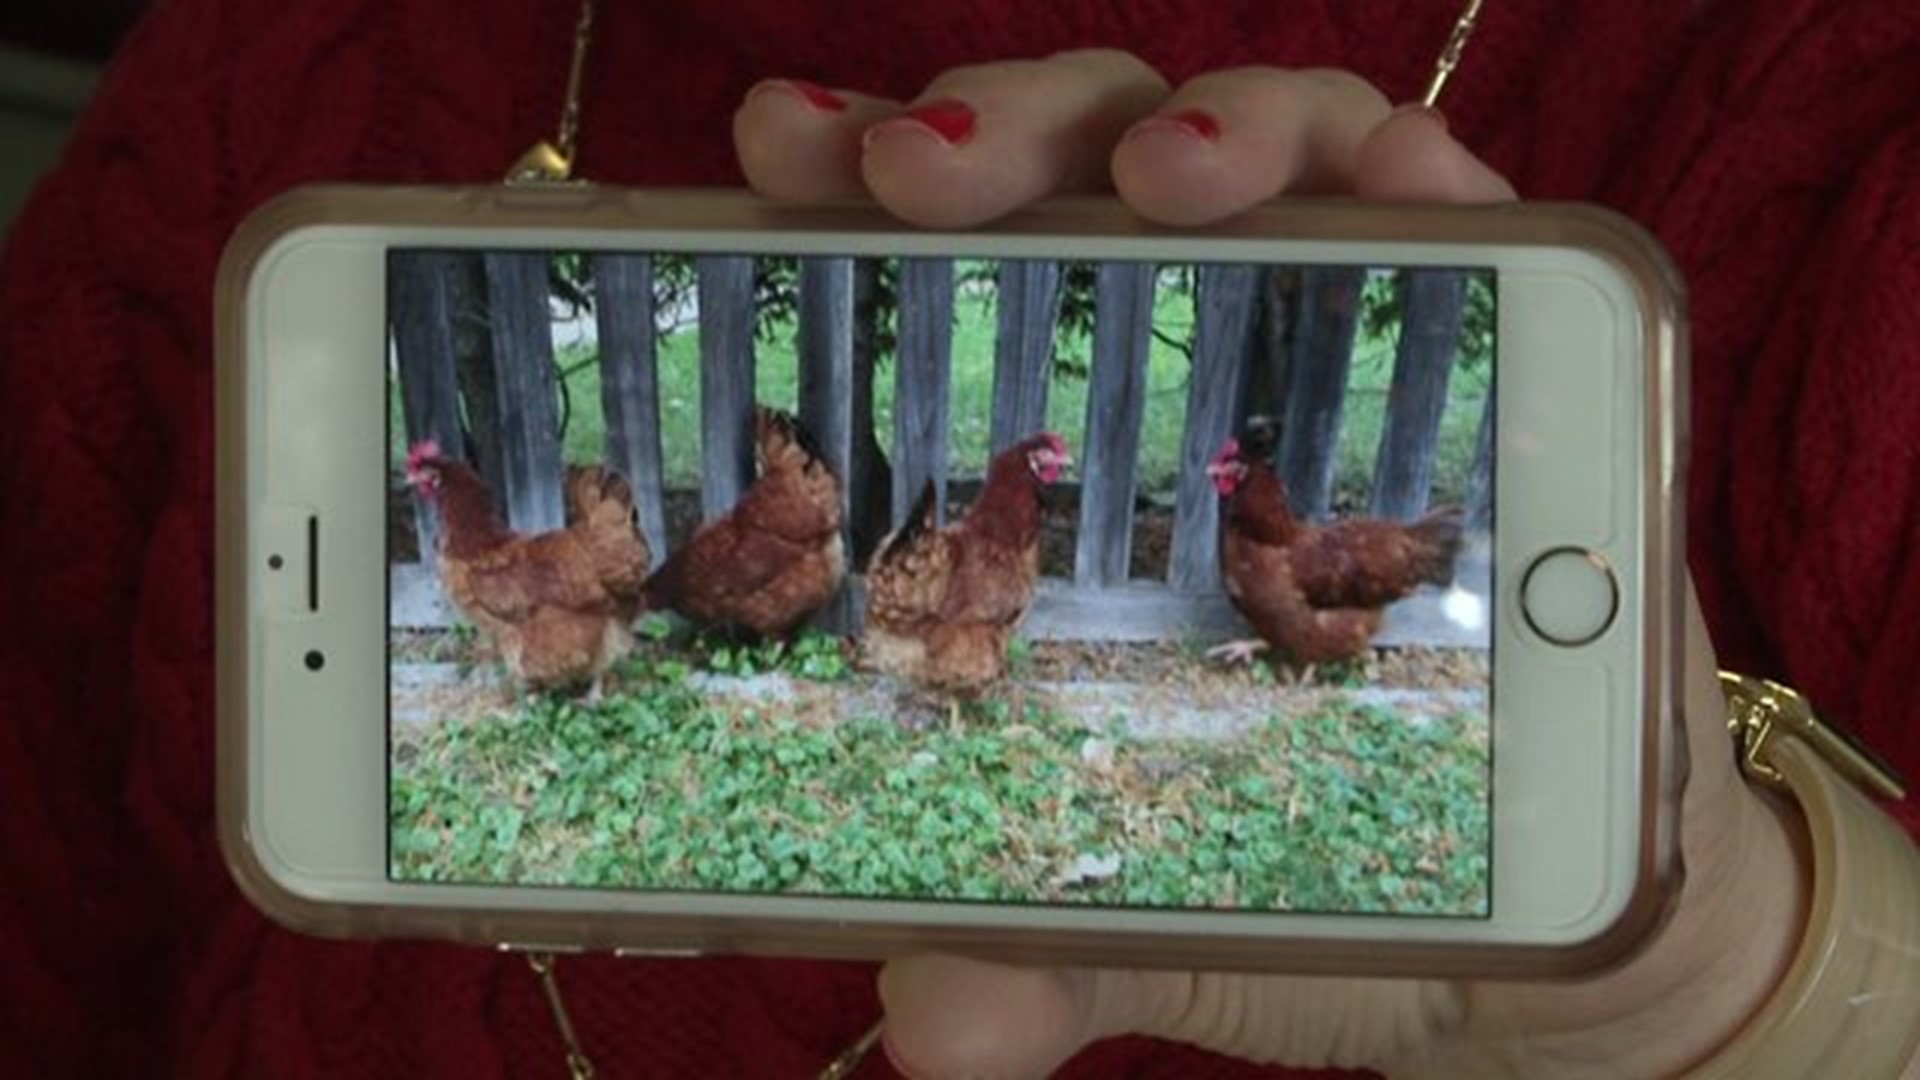 Wham Cam: More Chickens or More People?